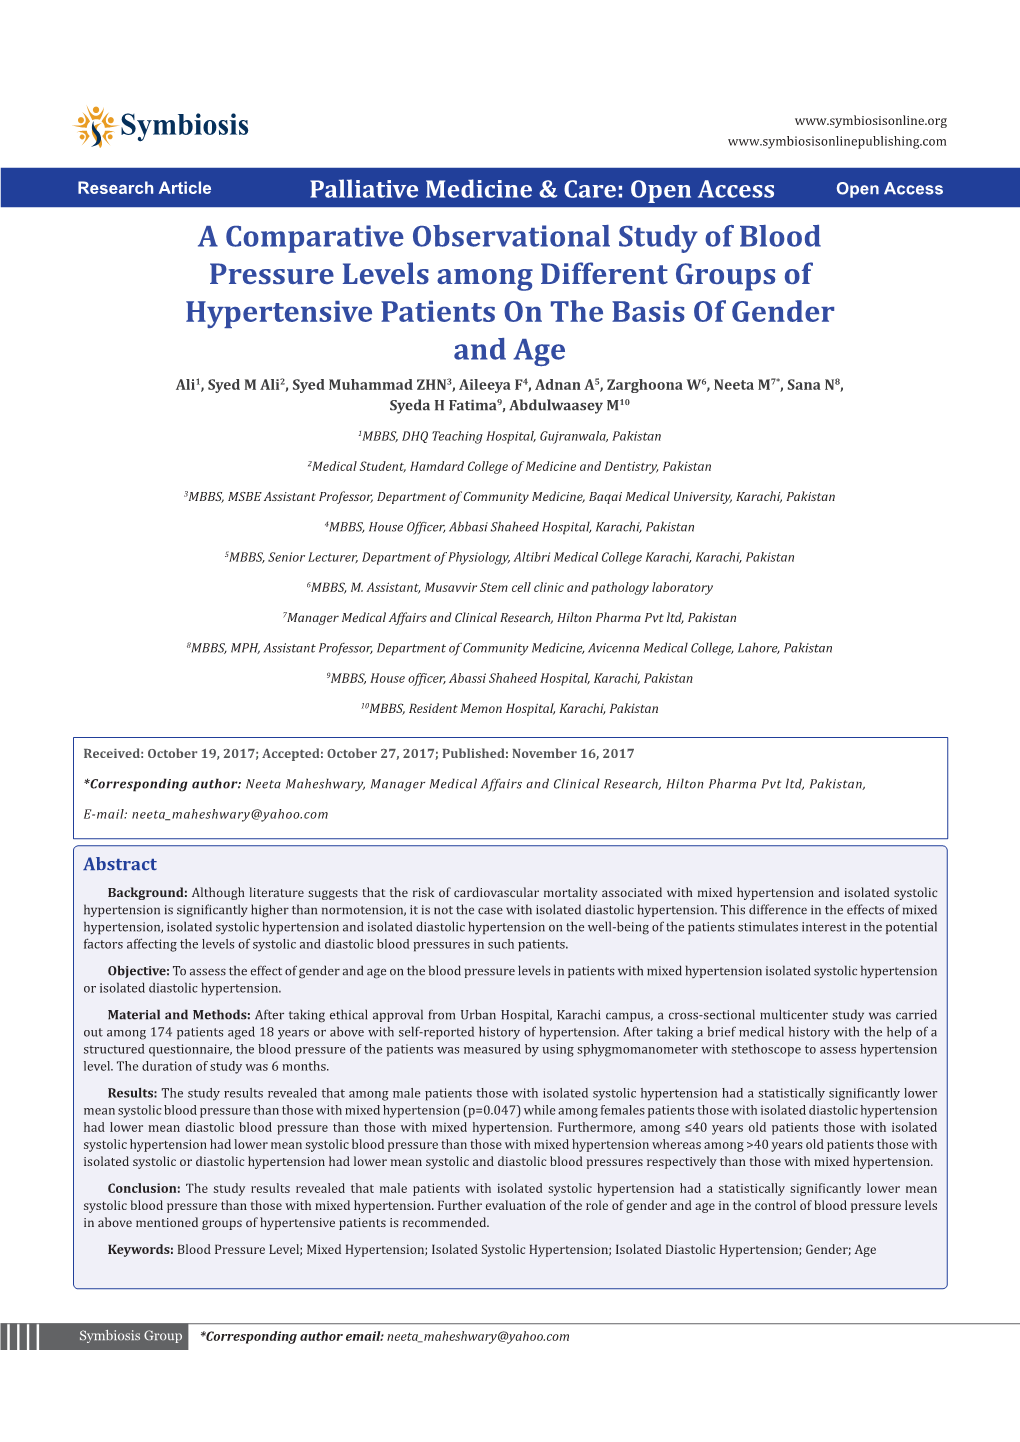 A Comparative Observational Study of Blood Pressure Levels Among